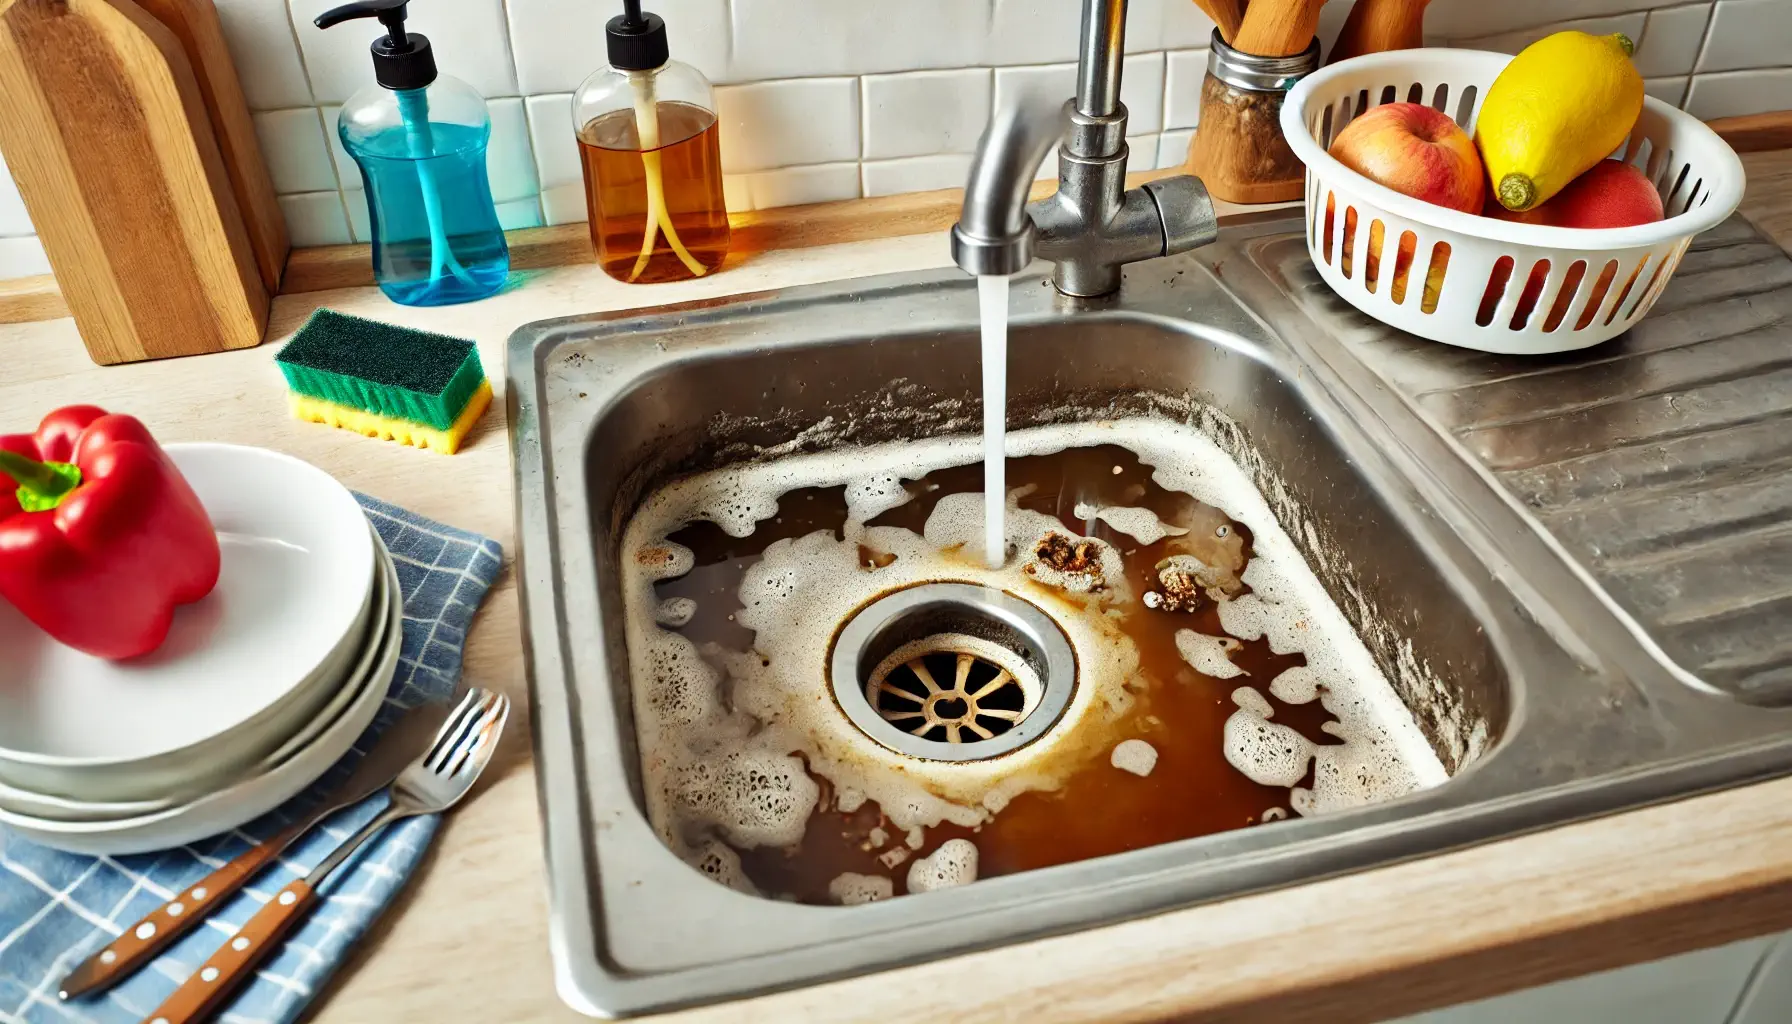 Kitchen sink clogged with greasy water and soap scum.